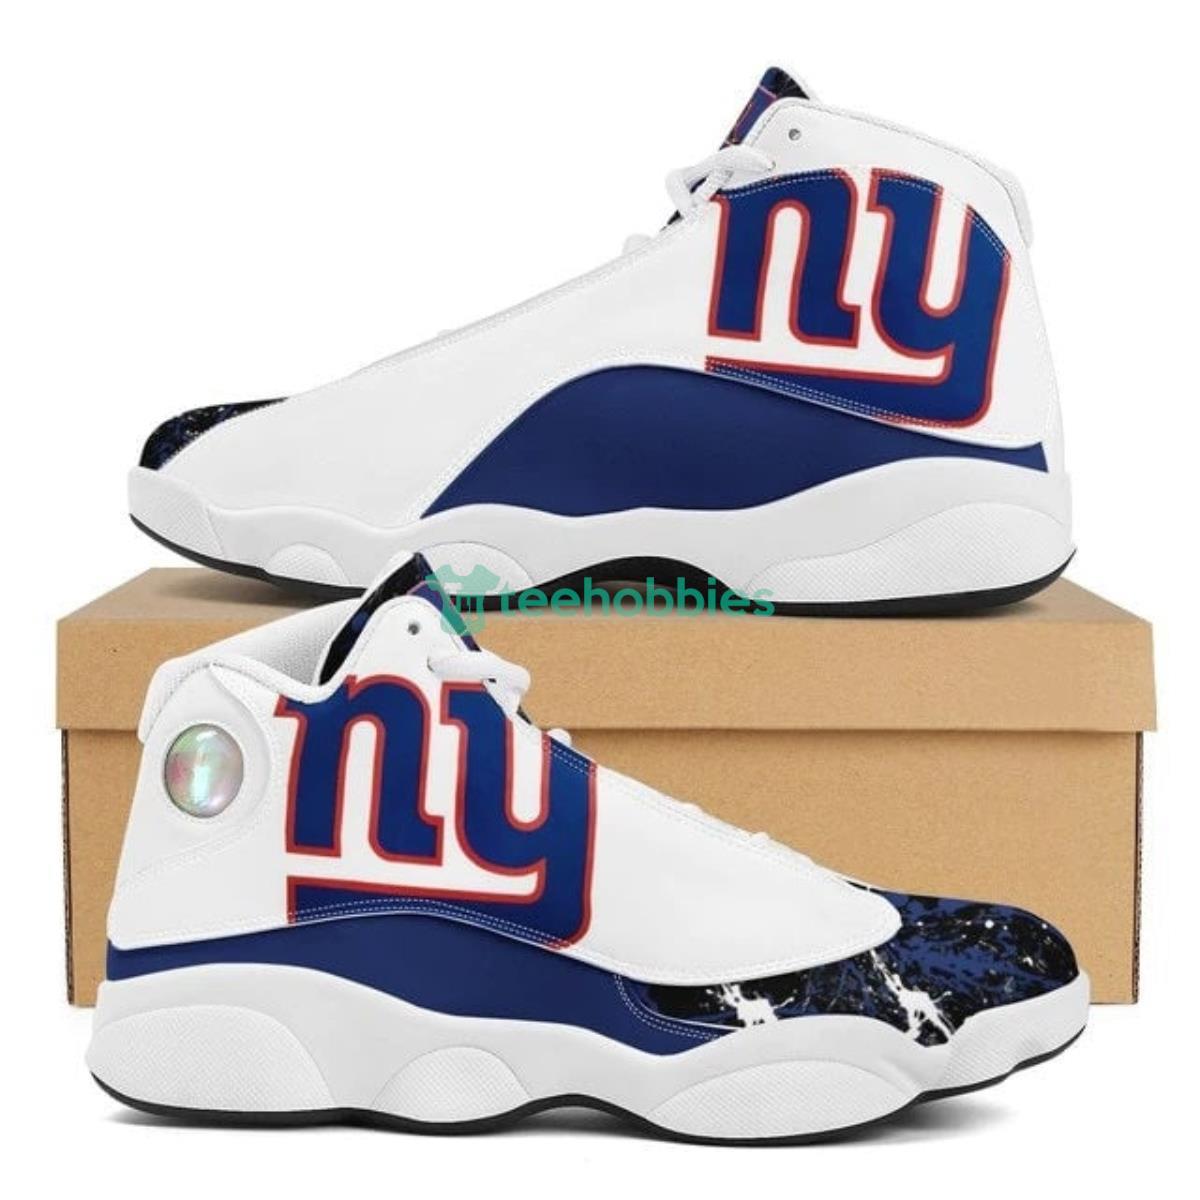 New York Giants Air Jordan 13 Shoes Running Casual Sneakers For Fans Product Photo 1